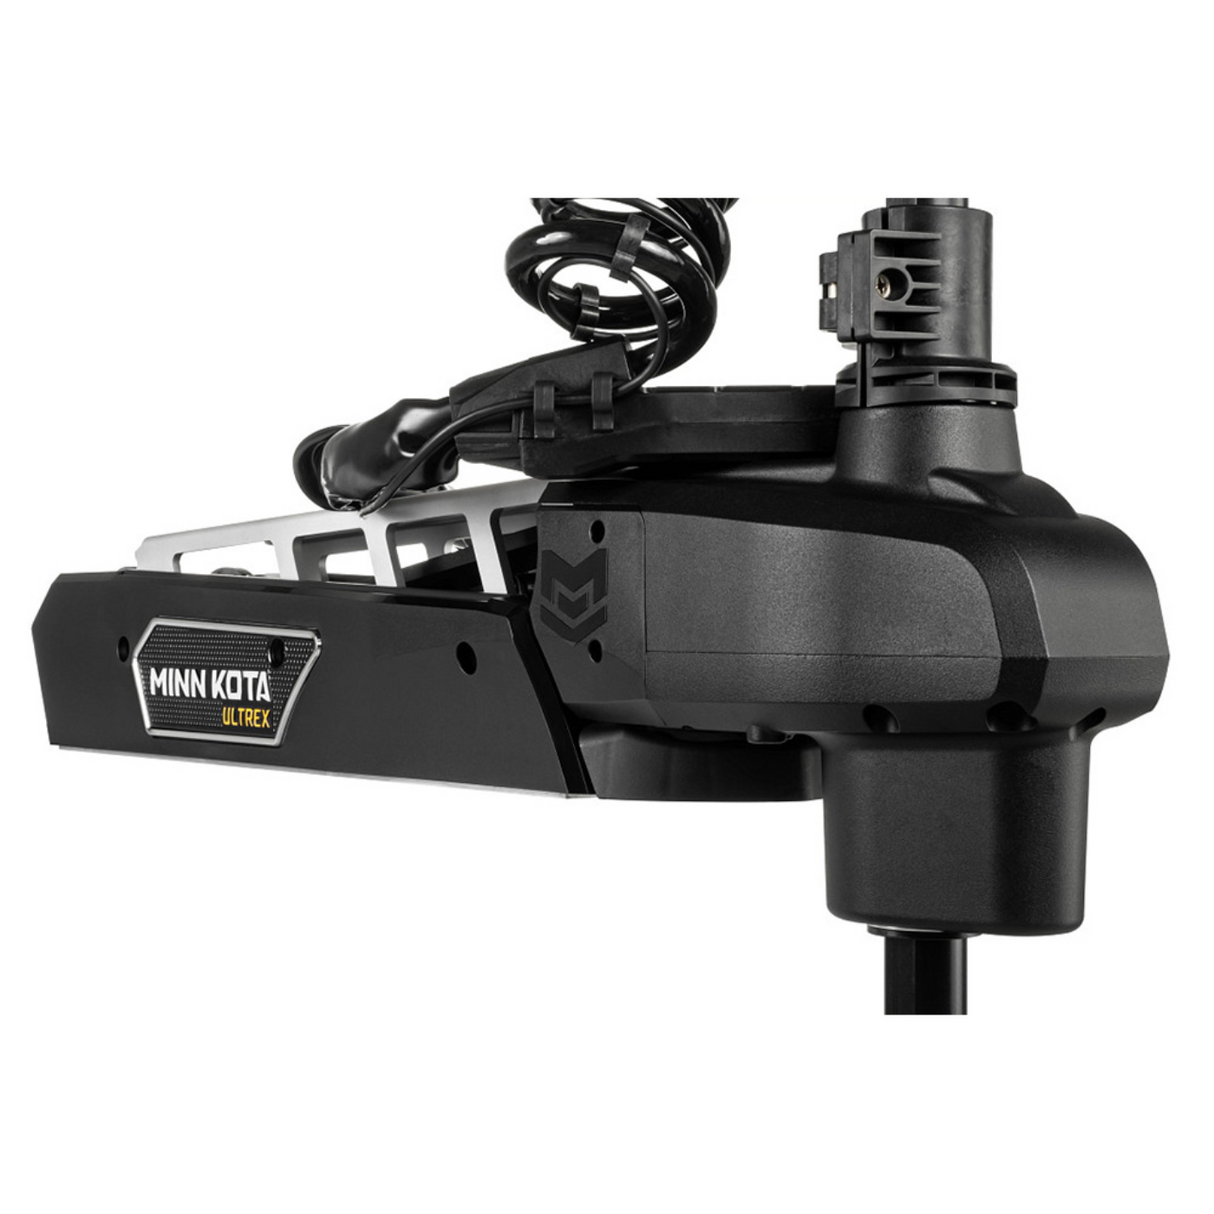 Ultrex Quest™ 90/115 Trolling Motor with Remote - Mega Down/Side Imaging - 52 in.